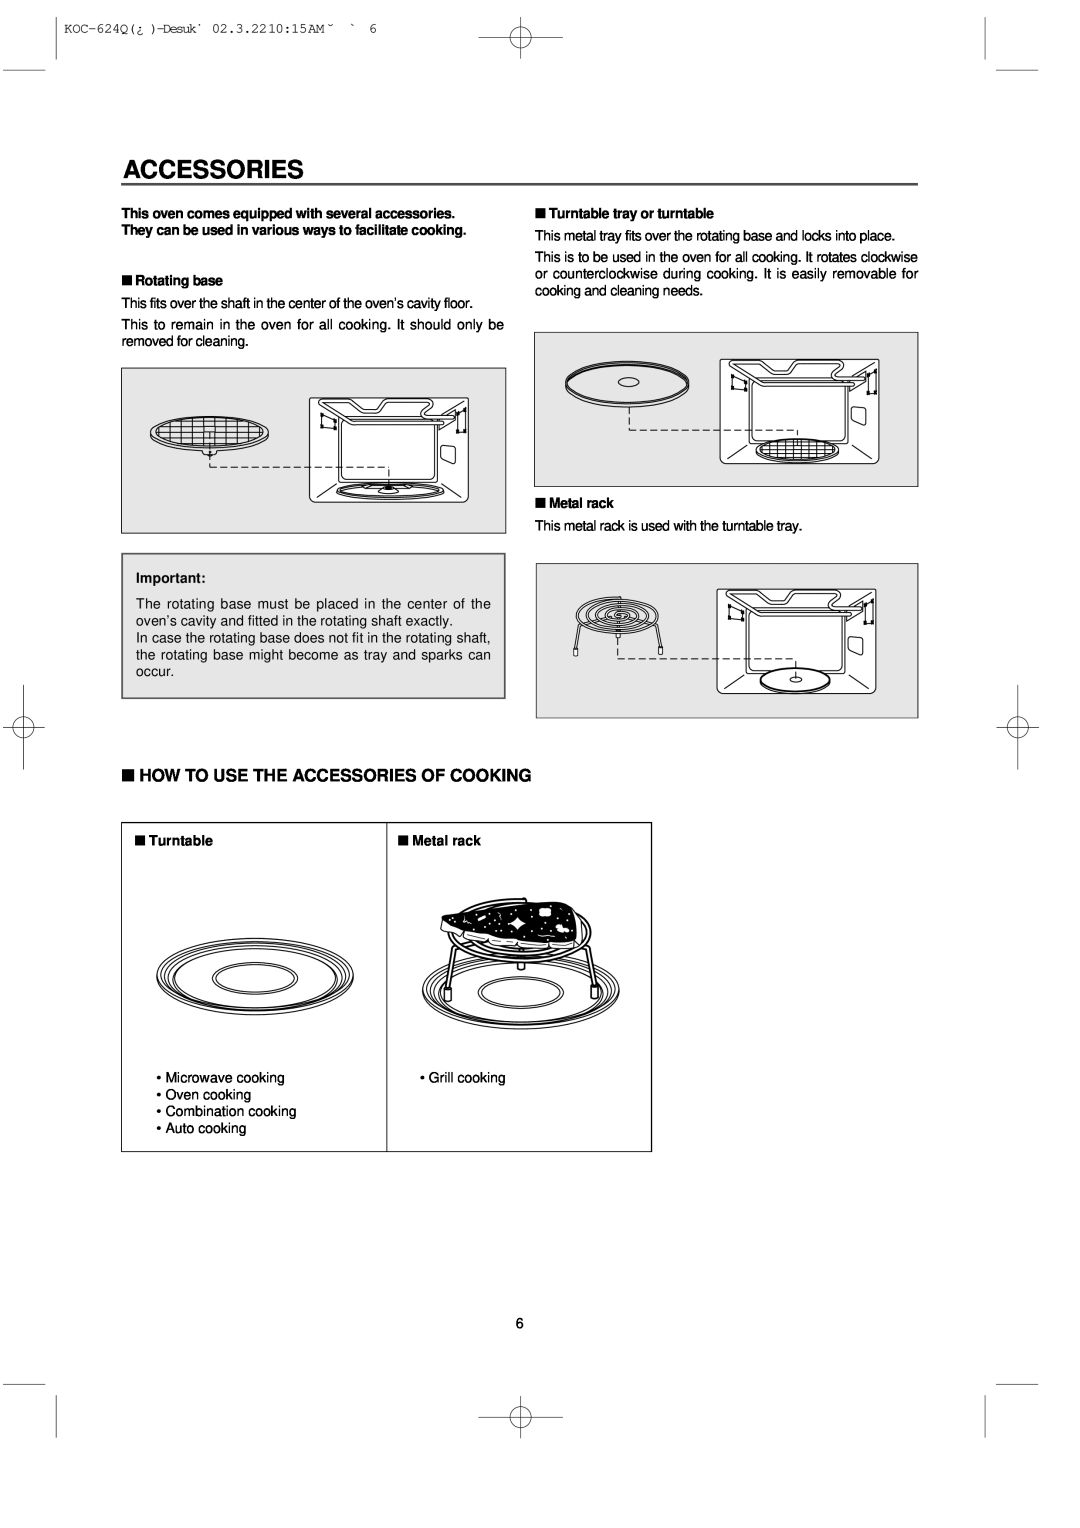 Daewoo KOC-624Q How To Use The Accessories Of Cooking, Rotating base, Turntable tray or turntable, Metal rack 